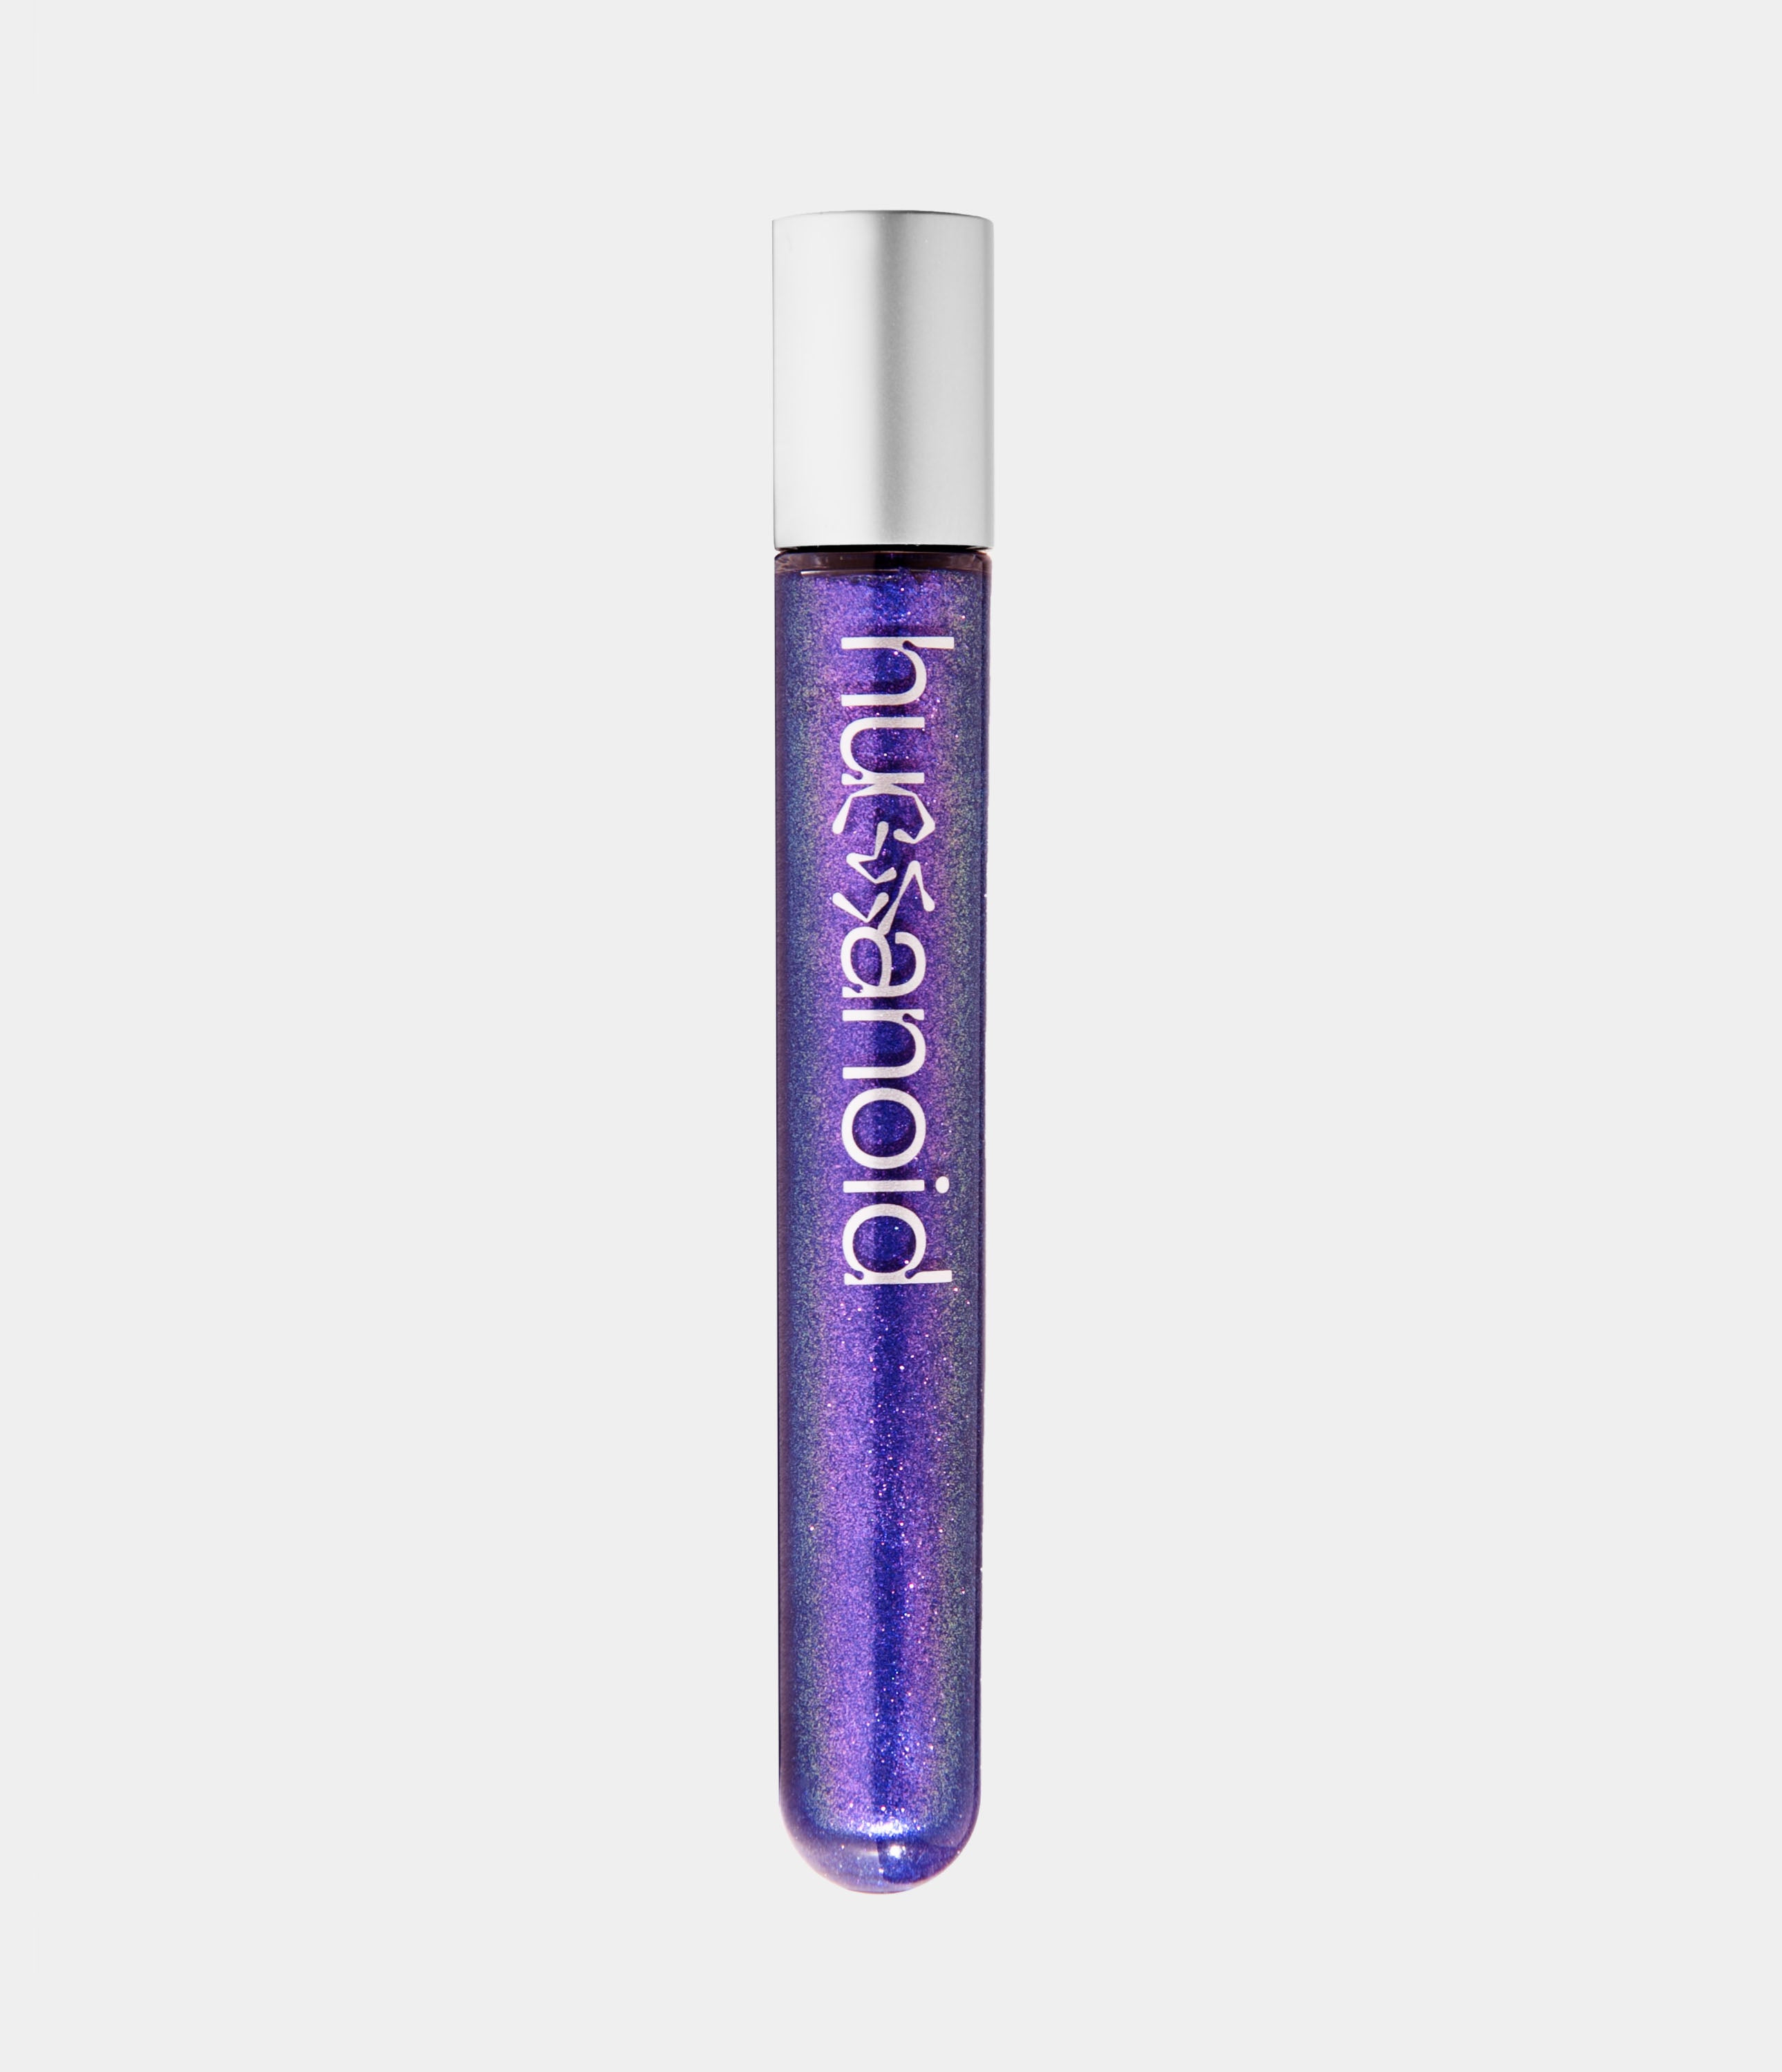 Transparent tube of purple shimmery eye and body makeup with a silver cap